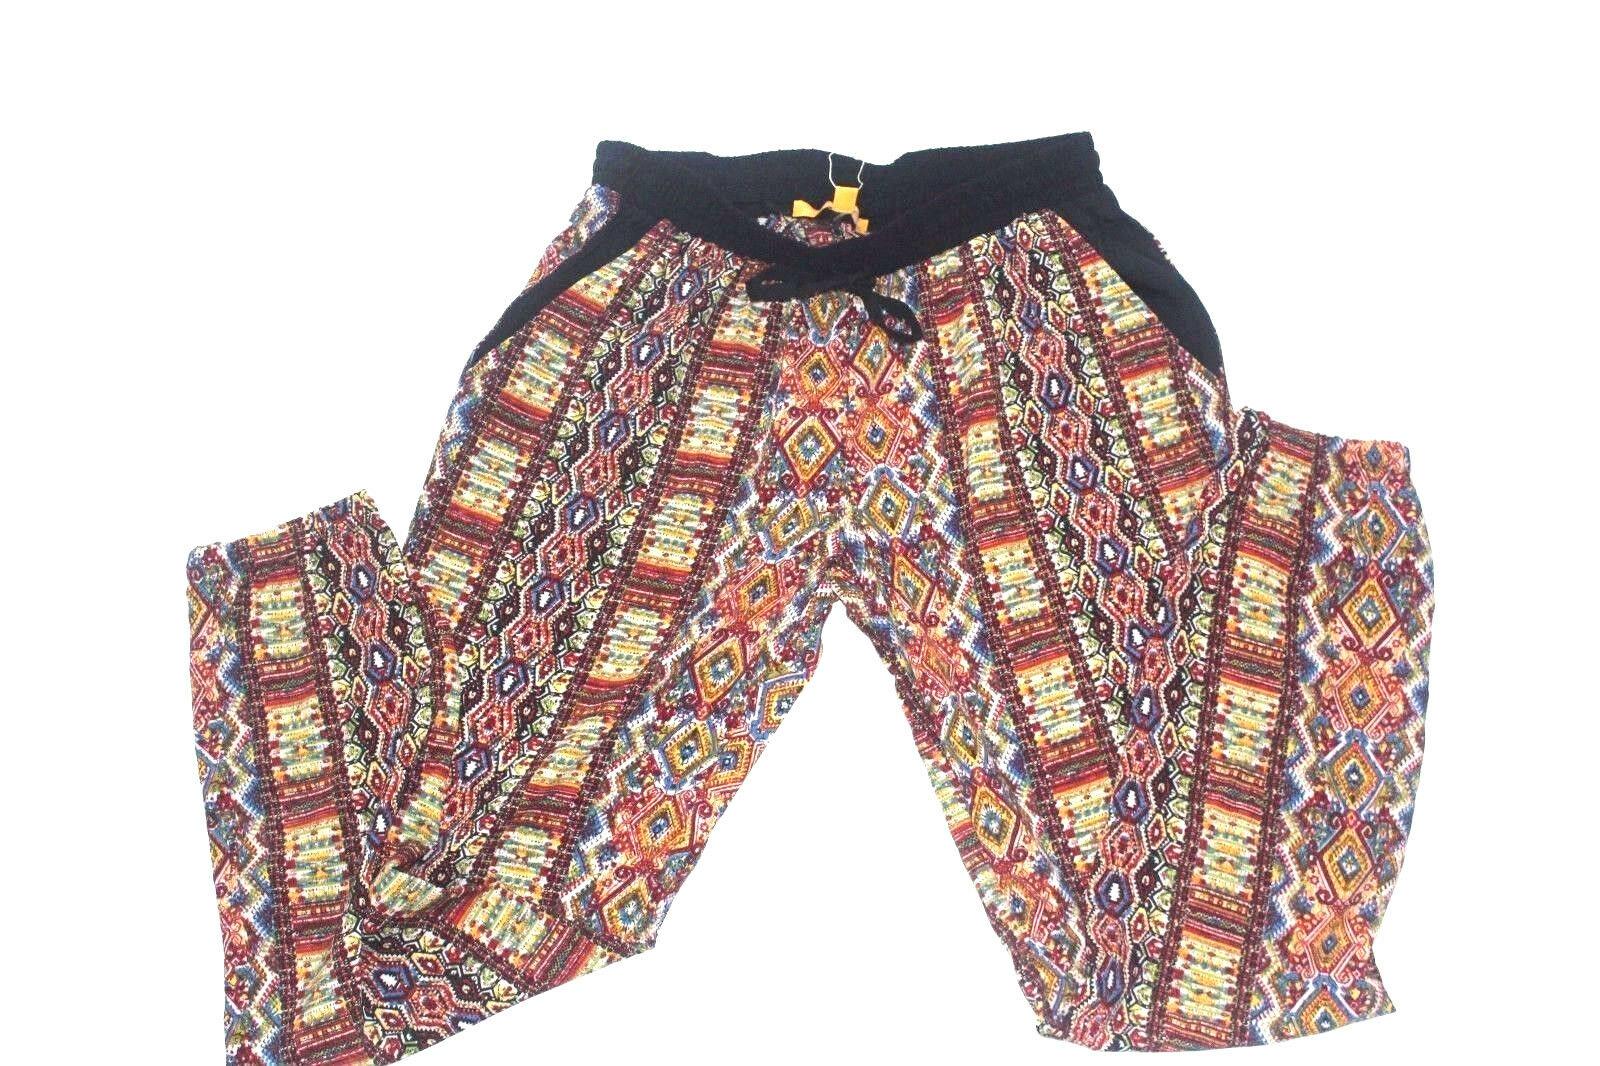 Walter By Walter Baker Pants Multicolor Geometric Print Size  M - SVNYFancy